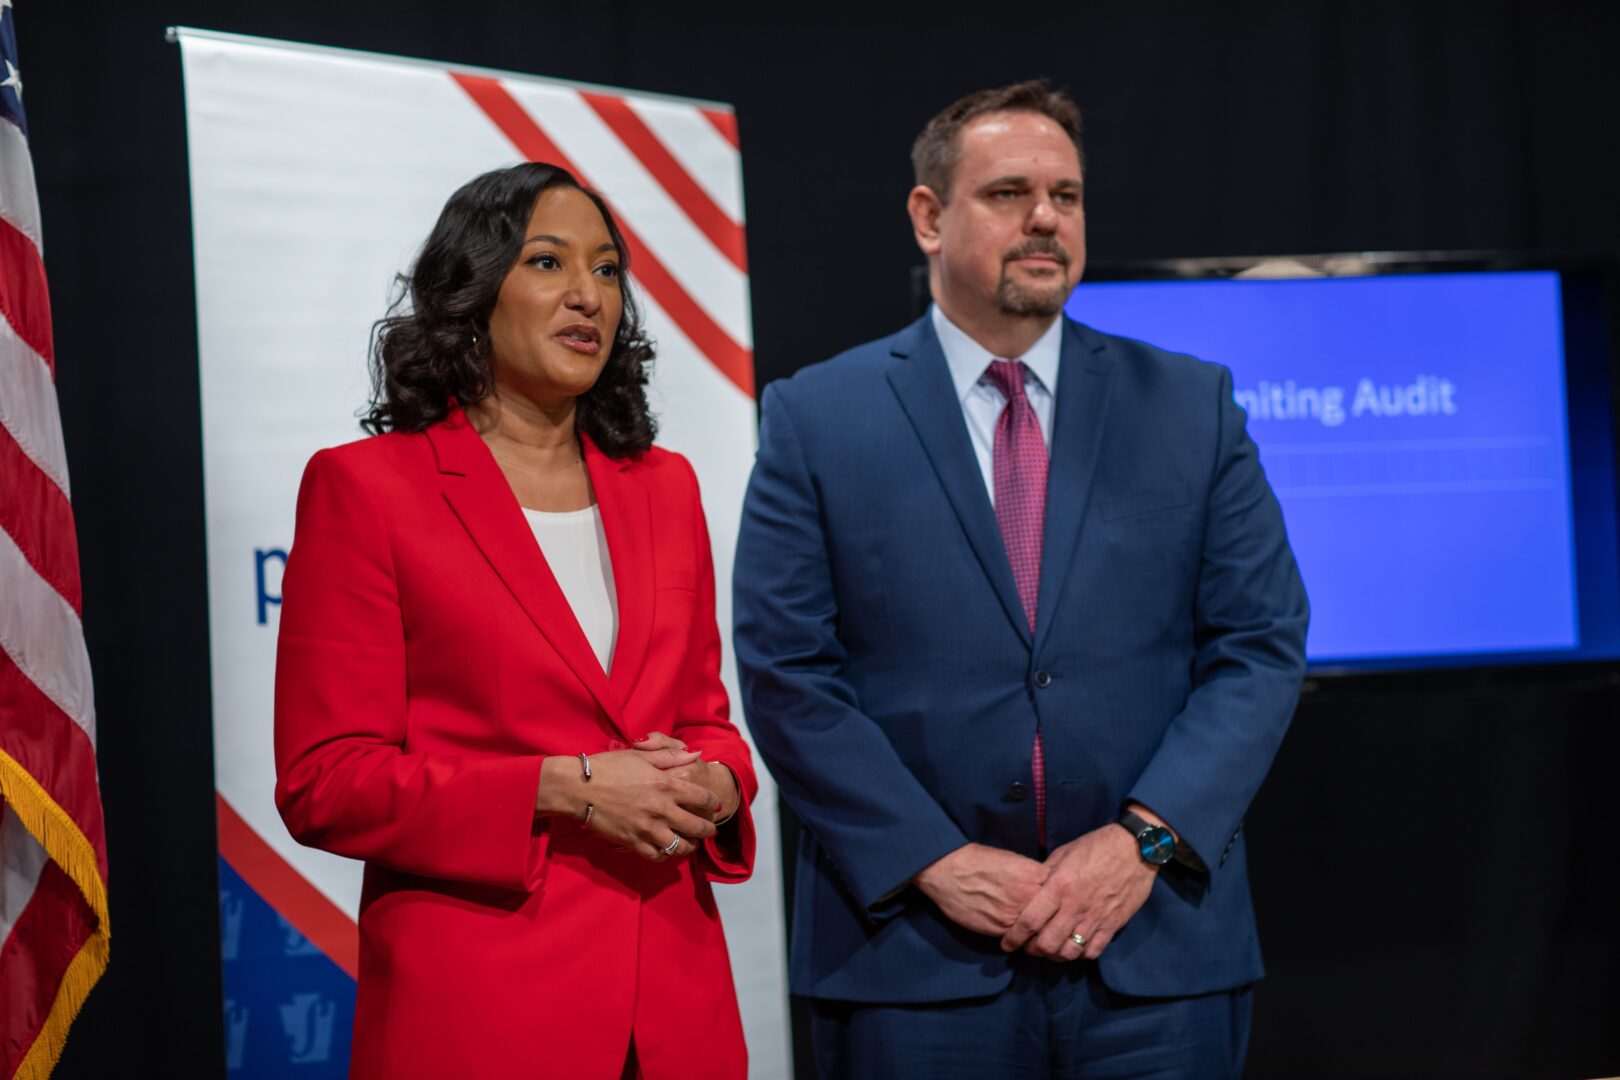 Pennsylvania's top election officials Leigh M. Chapman and Jonathan Marks recently attended a statewide risk-limiting audit of the 2022 midterms.